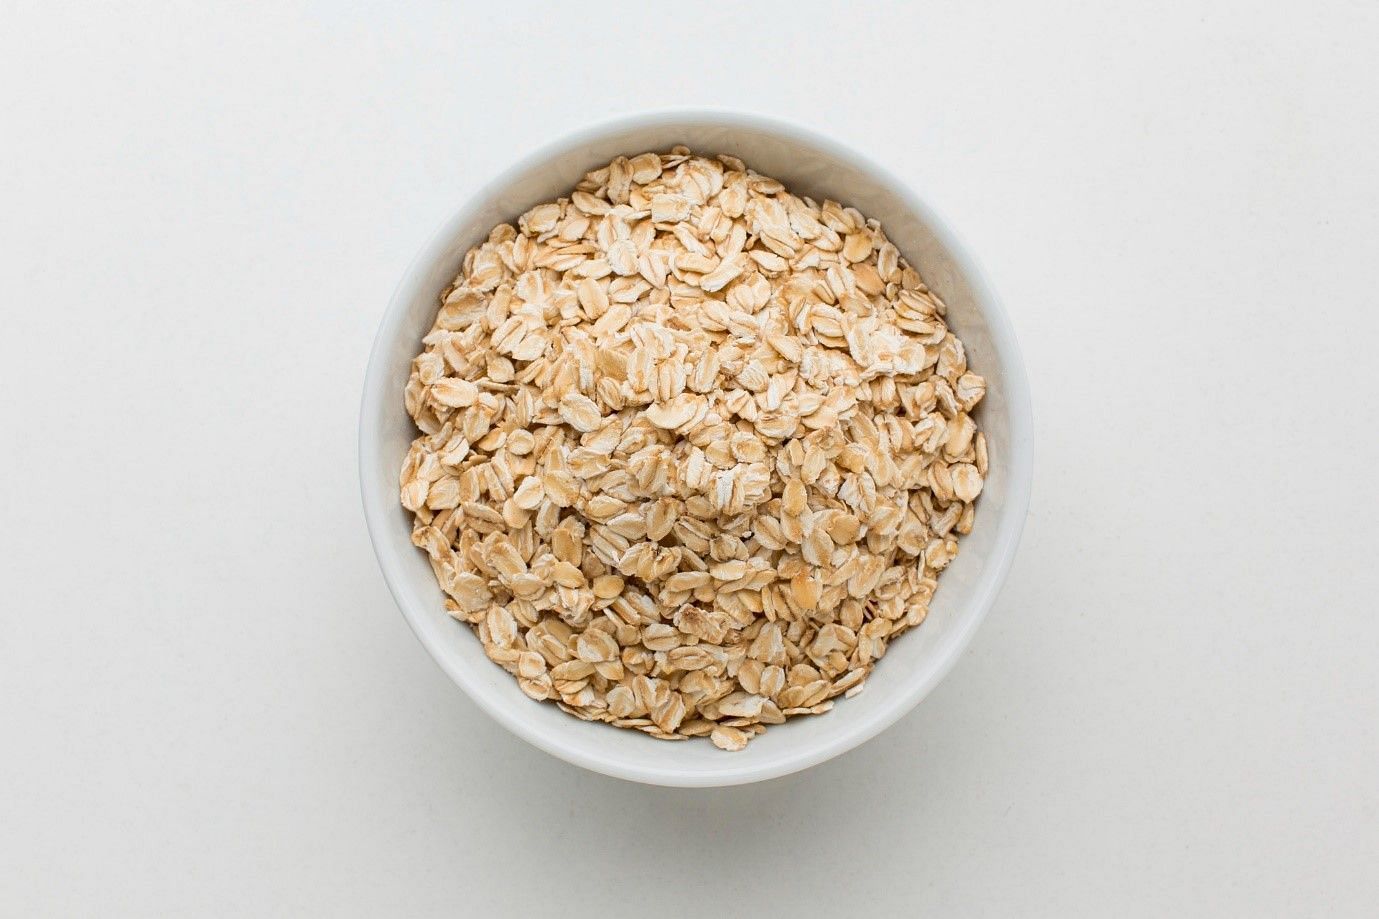 Oatmeal is becoming a very popular breakfast due to the ease of incorporating various fruits and flavorings in it (image by Freepik on Freepik)